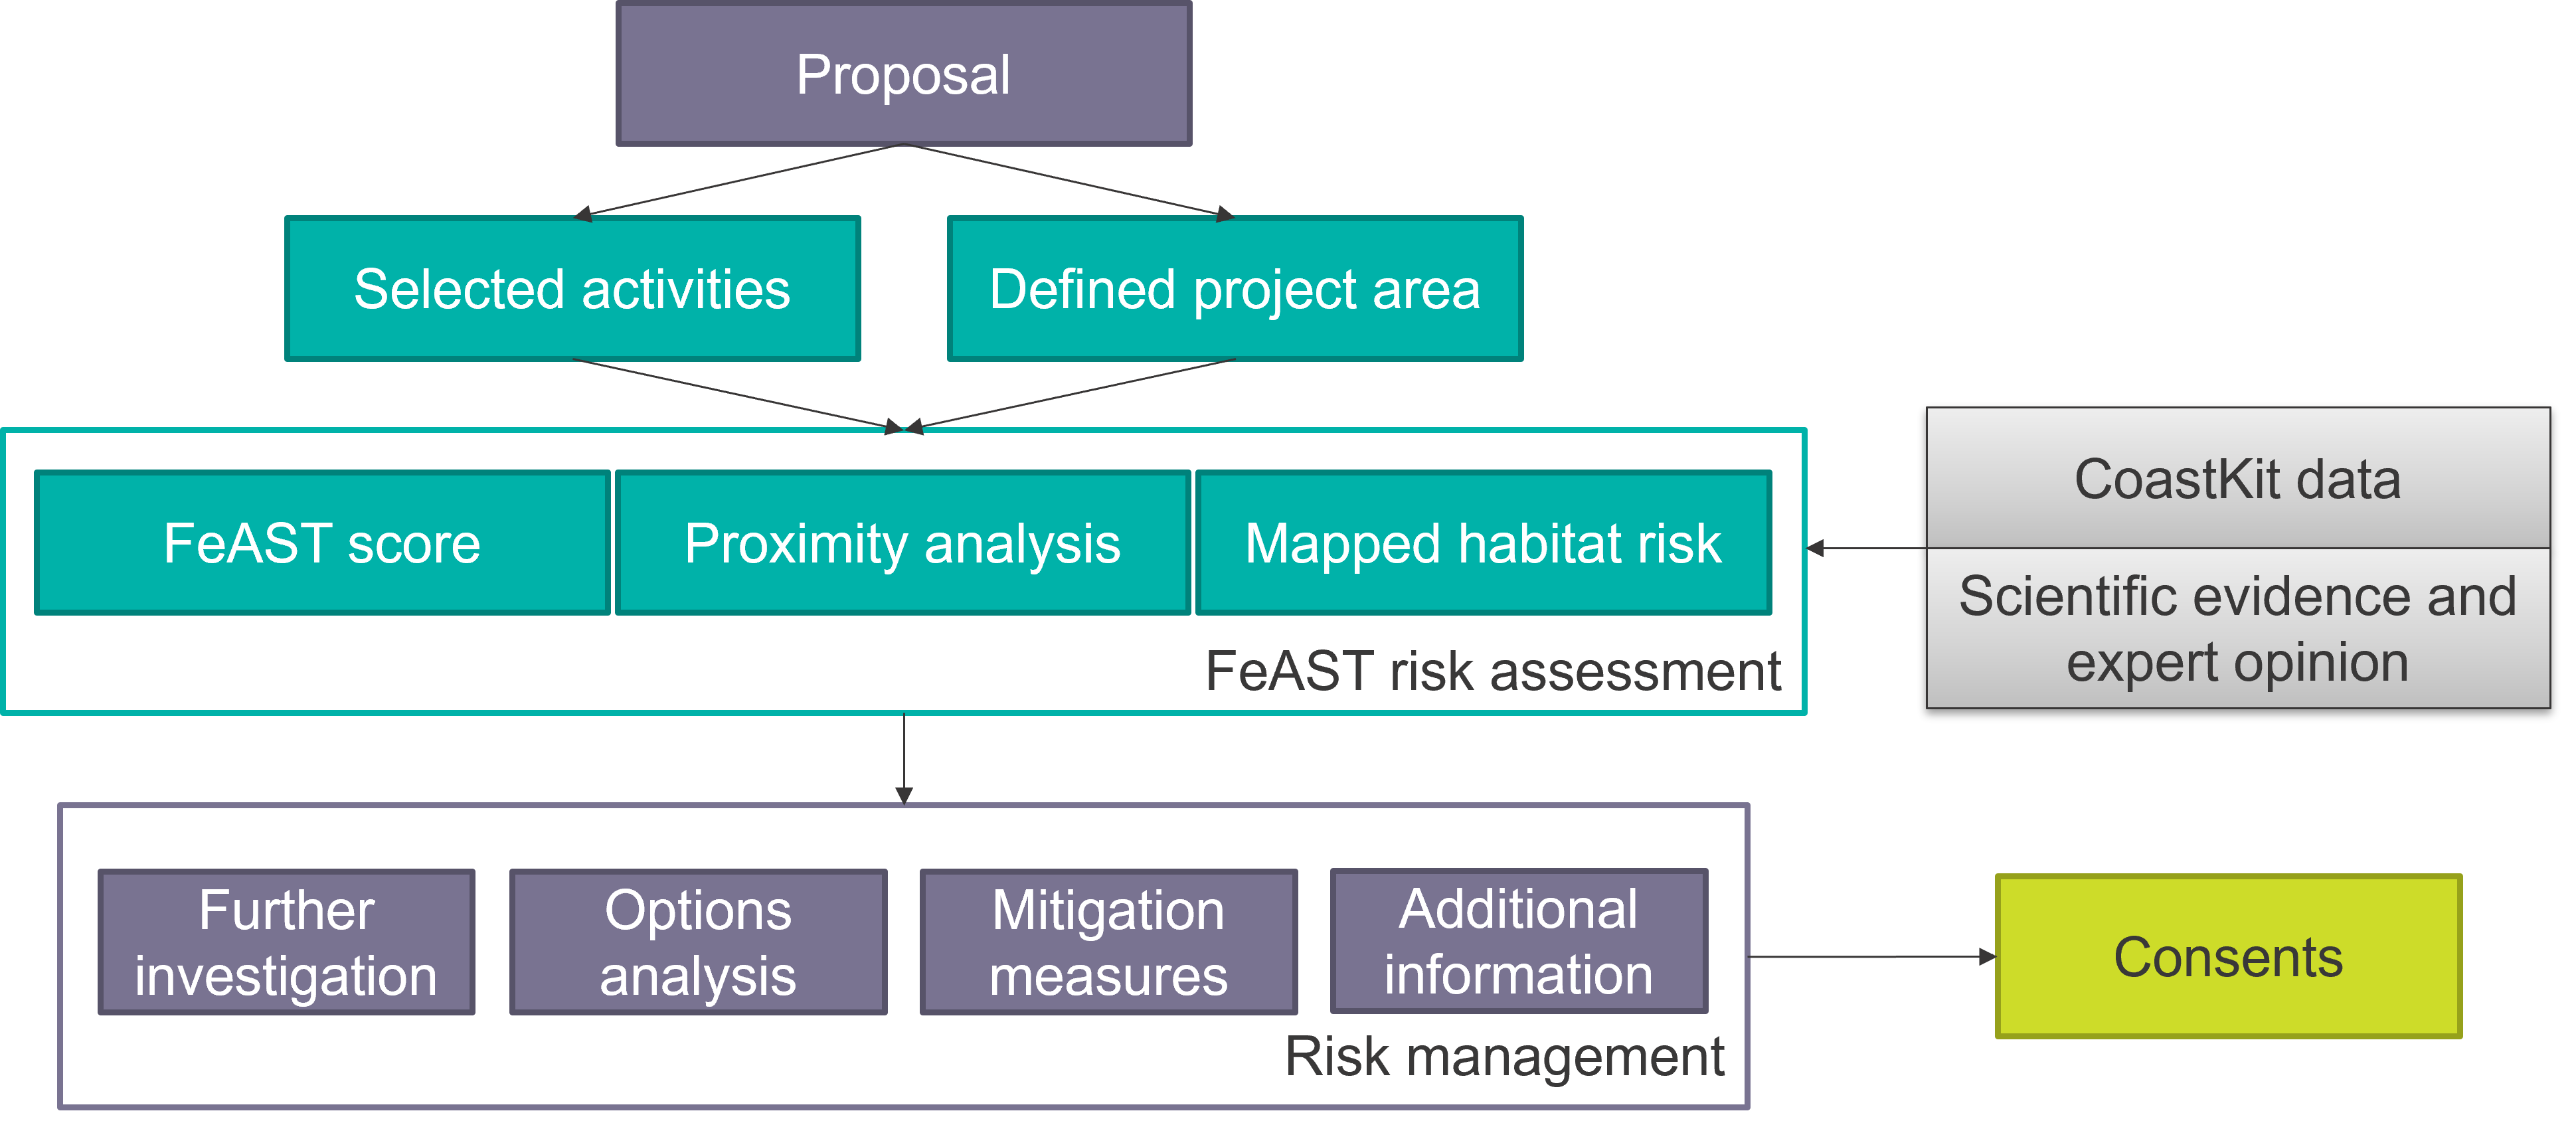 Diagram of the FeAST risk assessment process with inputs and outputs